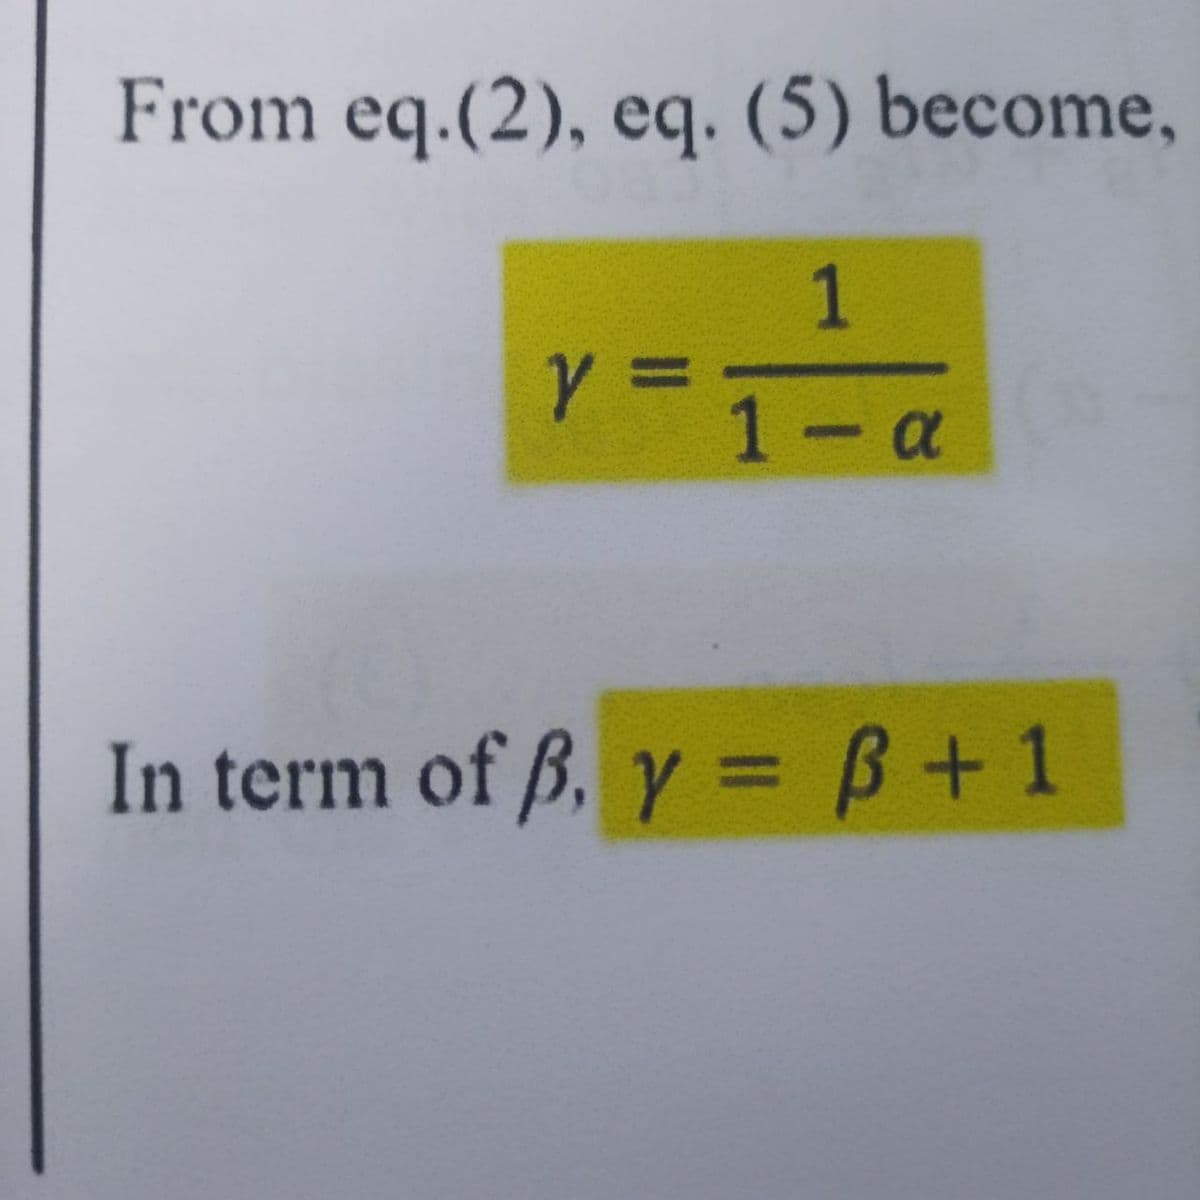 From eq.(2), eq. (5) become,
1
1- a
In term of ß, y = B+1
%3D
